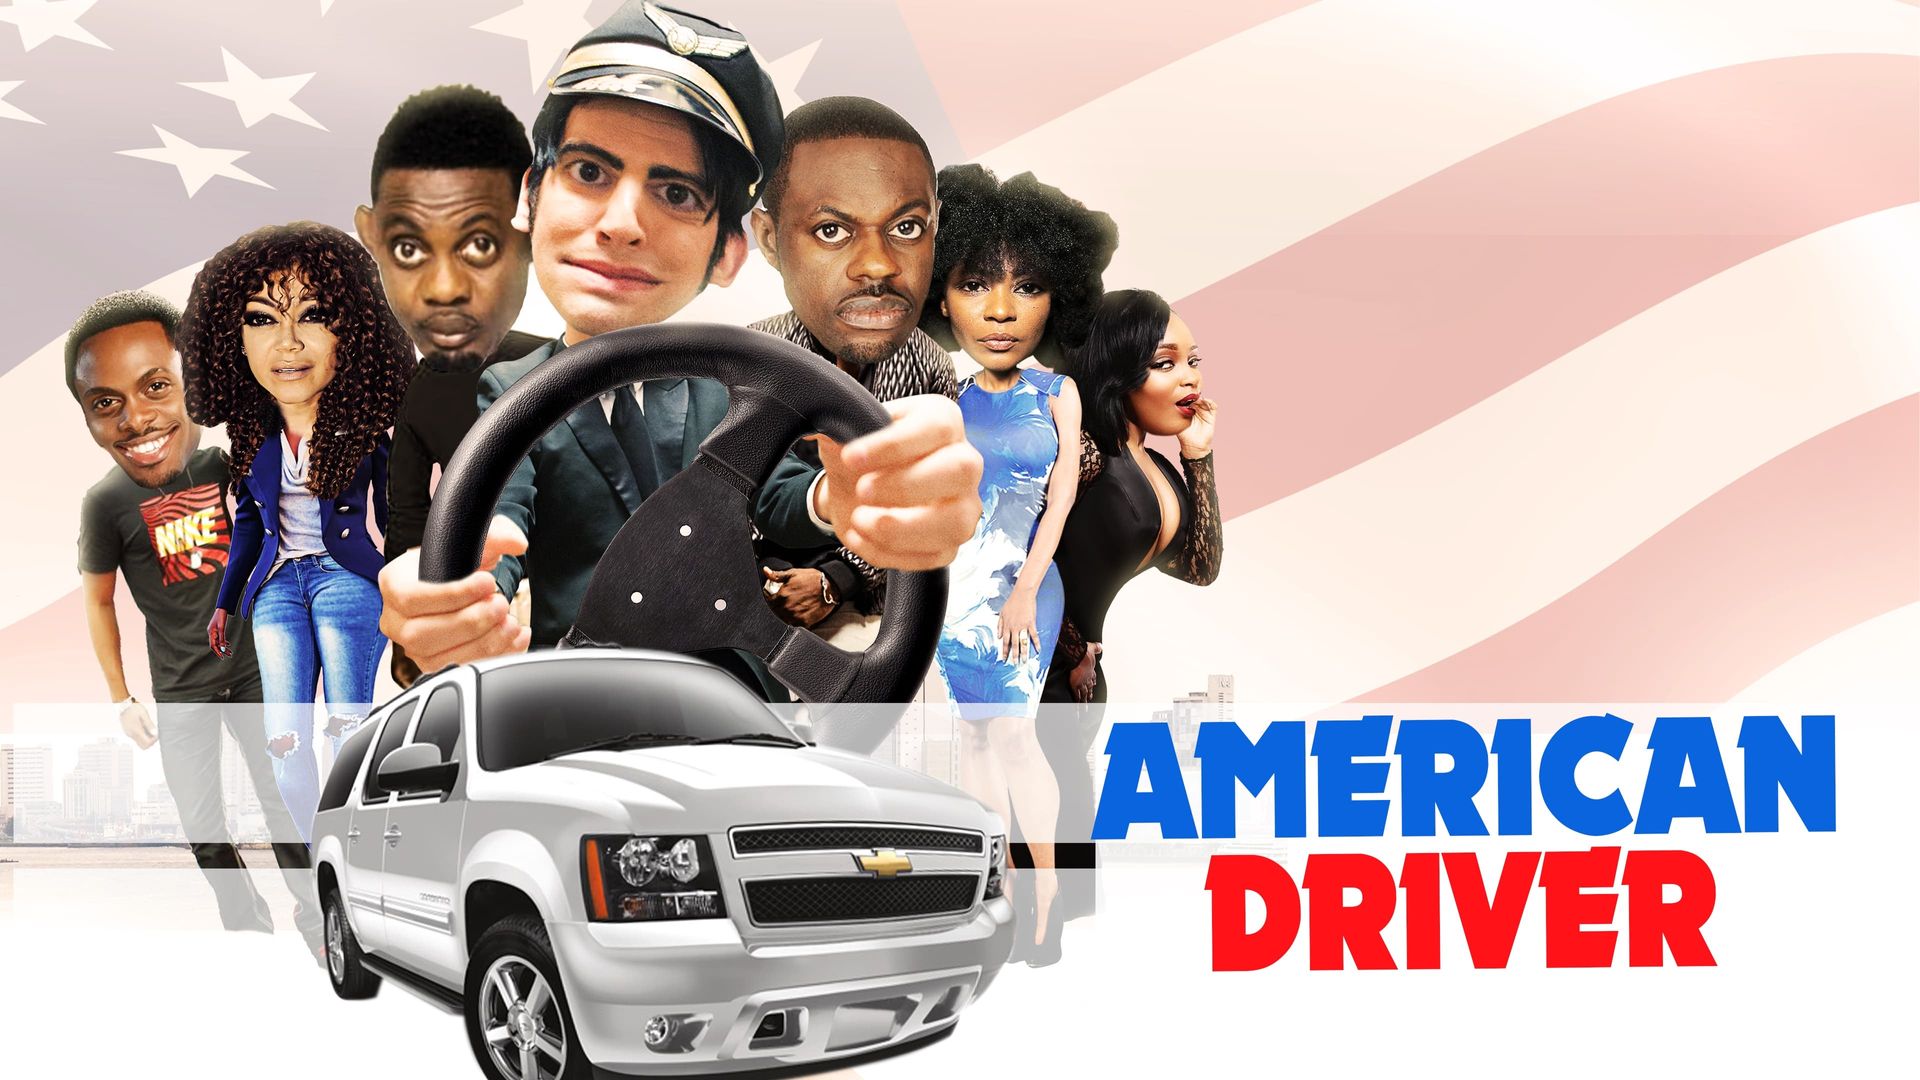 American Driver background